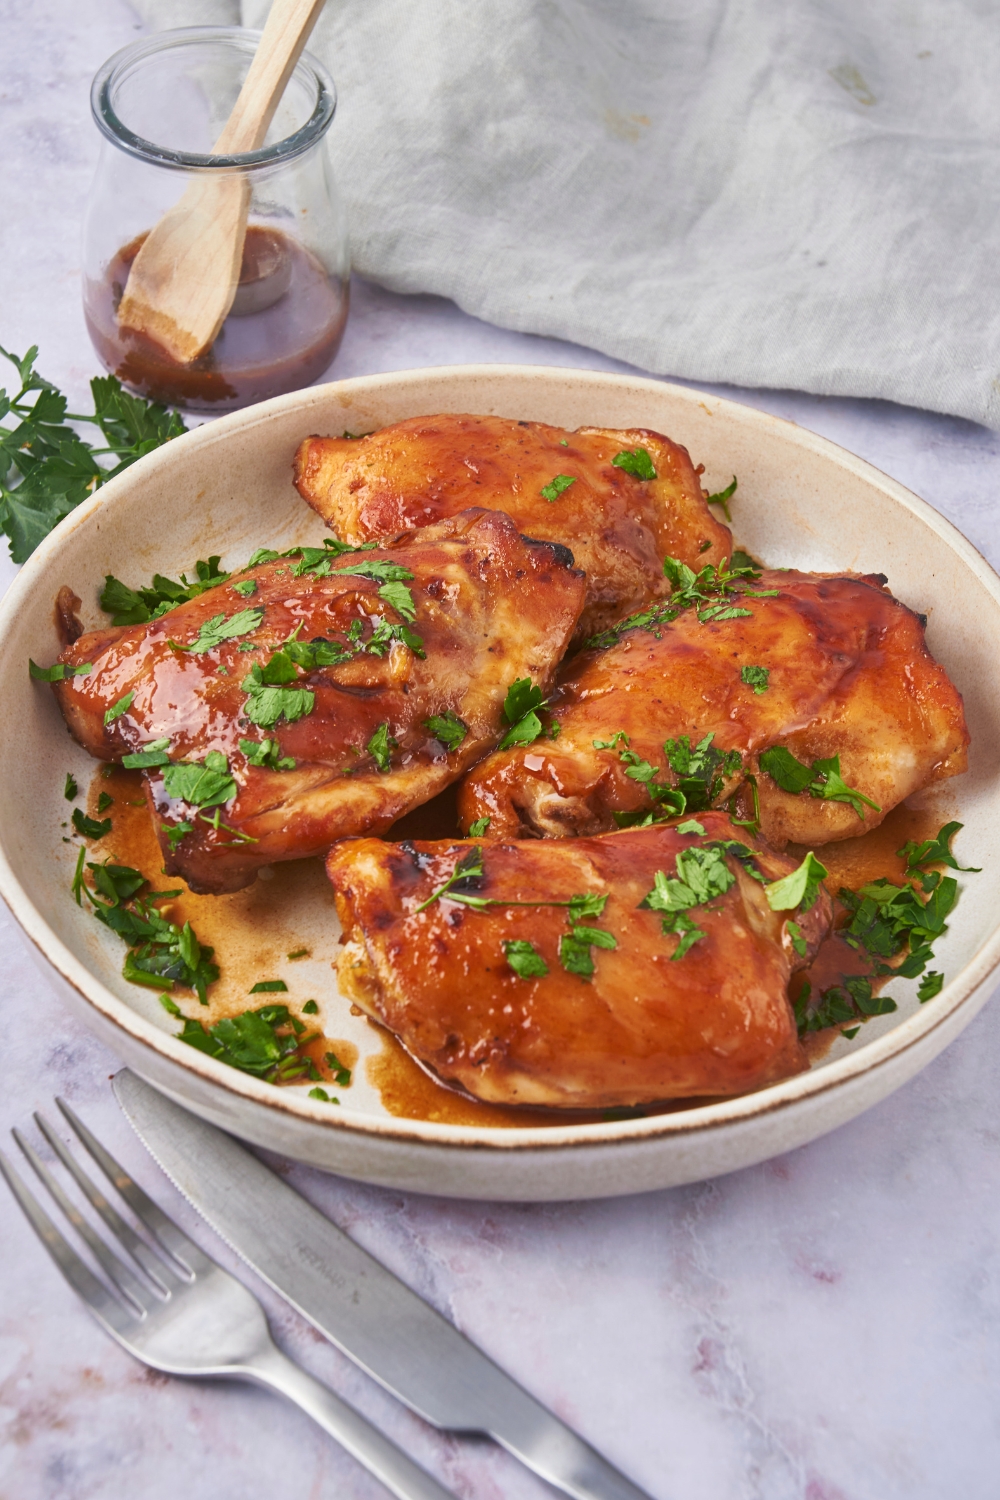 Baked chicken thighs in on a white plate. The chicken is coated in a brown sauce and garnished with fresh herbs and there is a fork and knife next to the chicken.